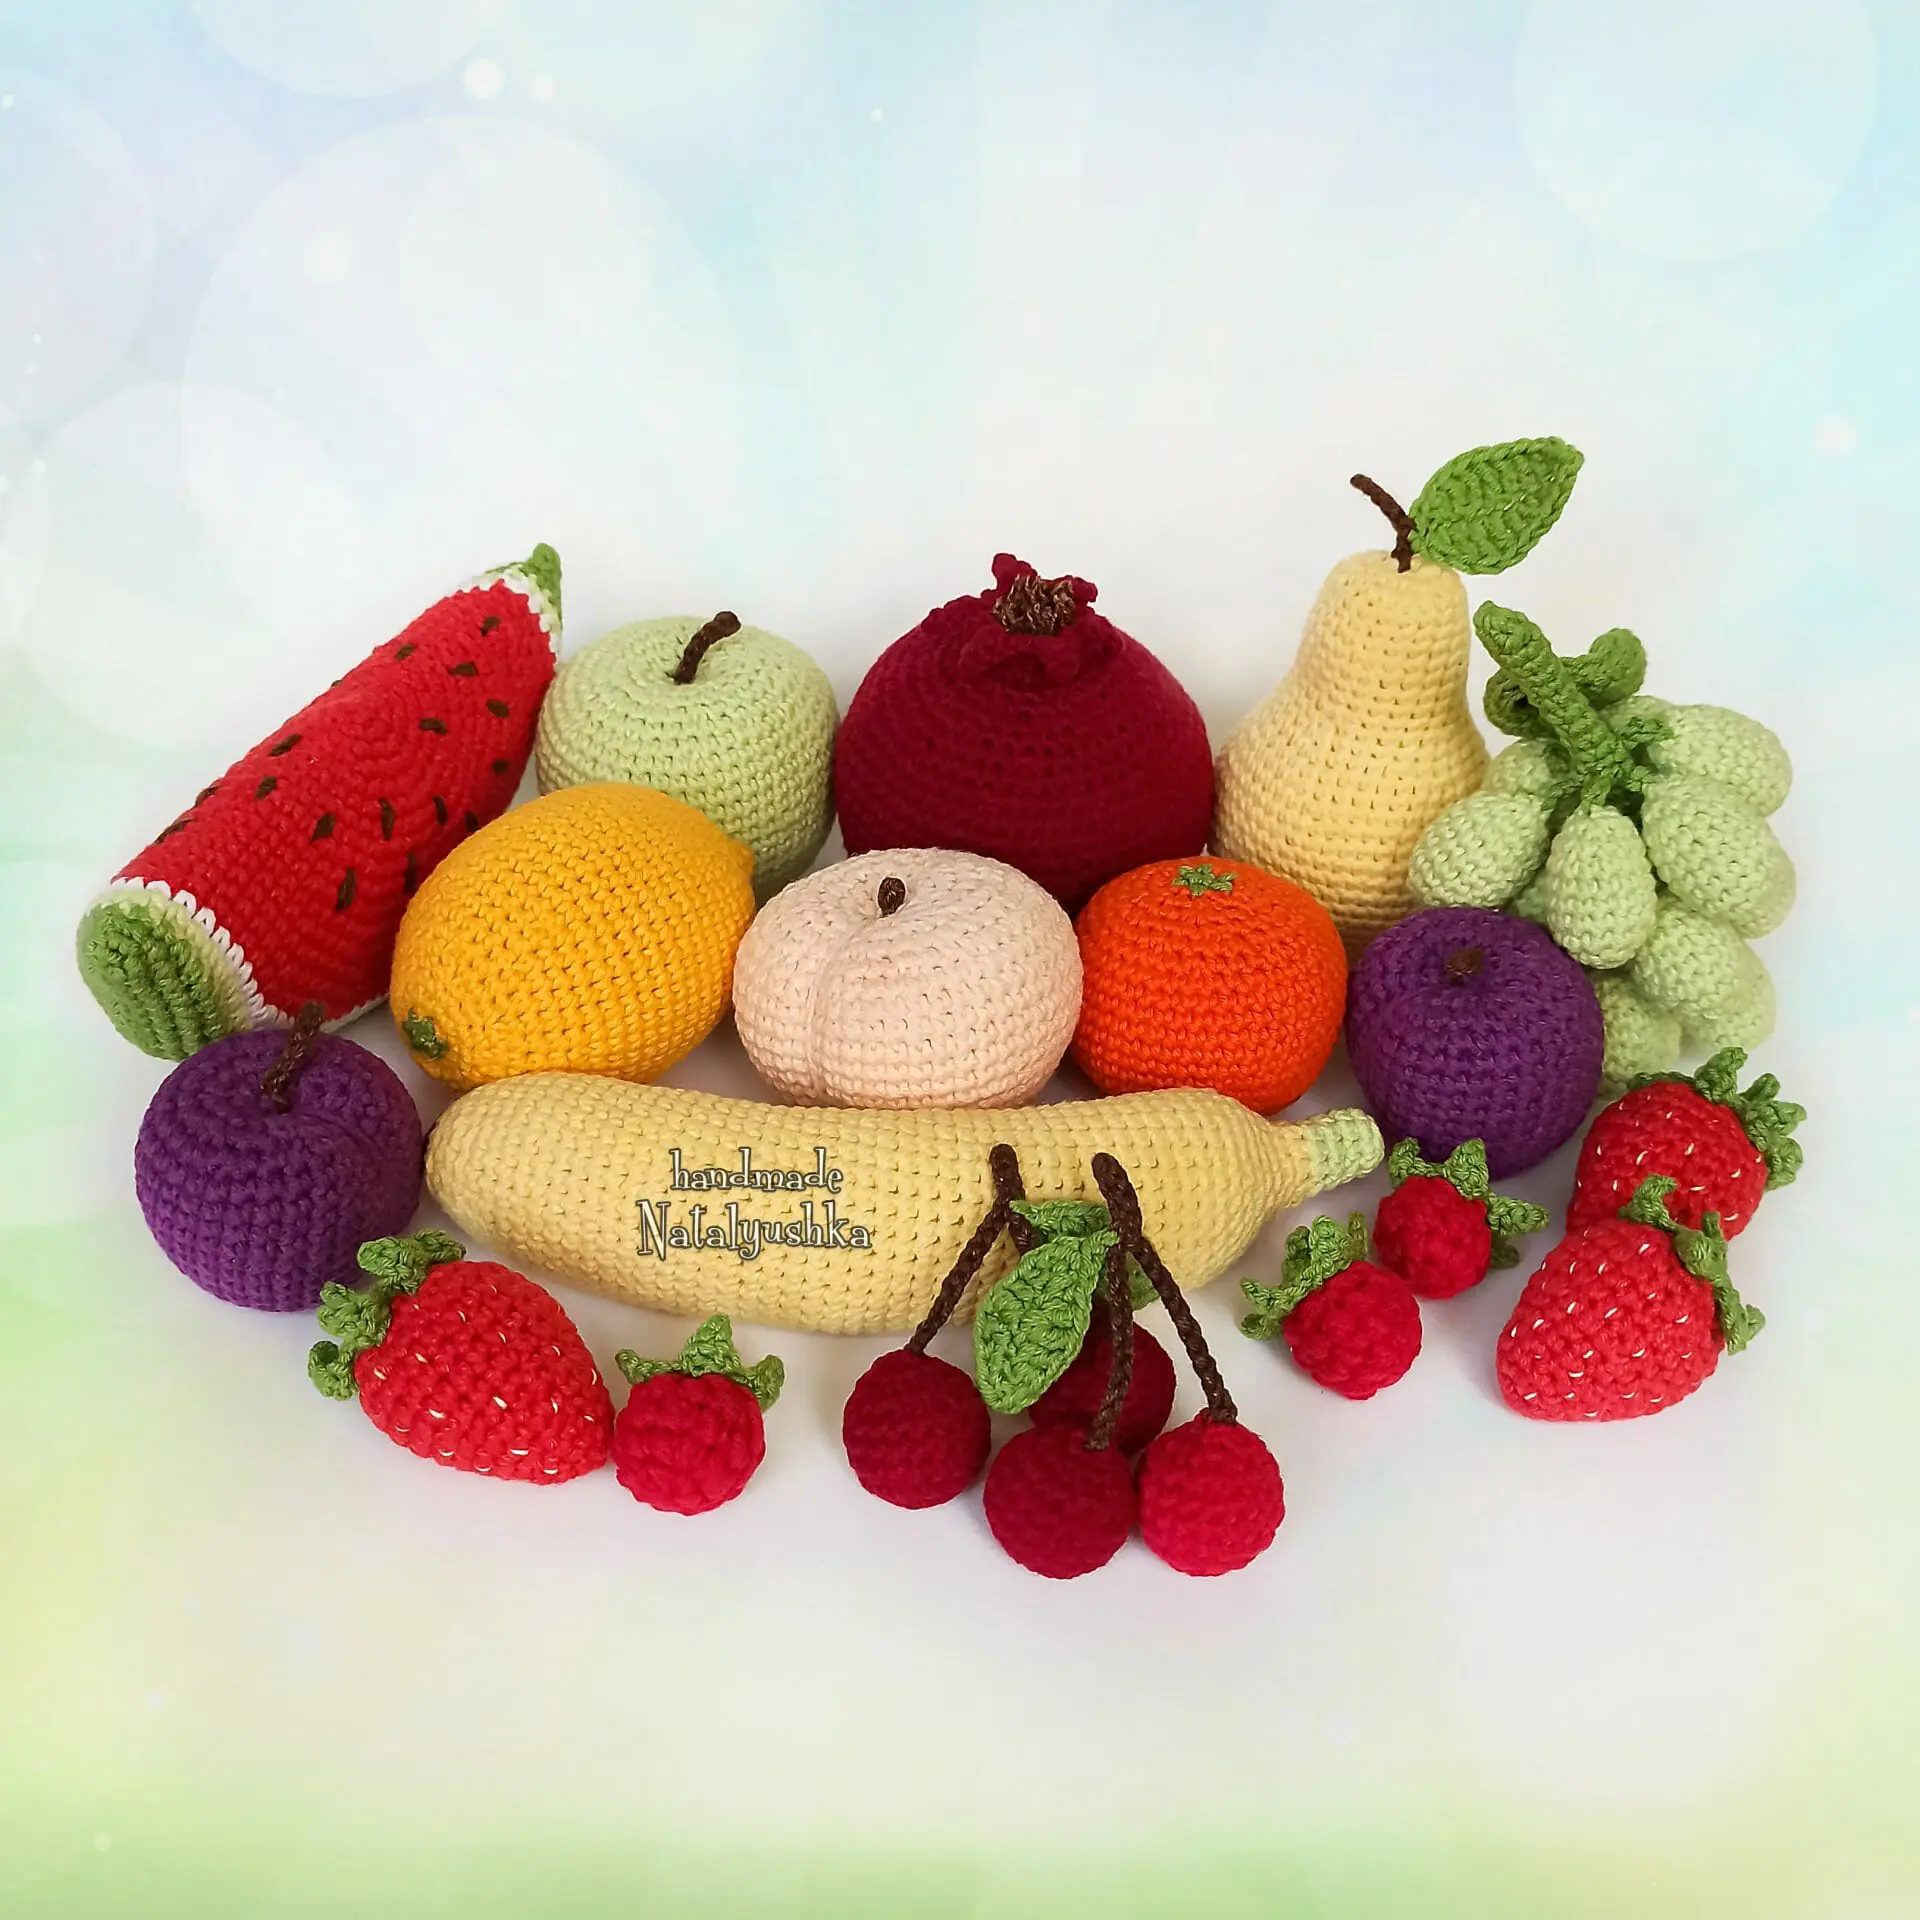 Fruits & Berries toys